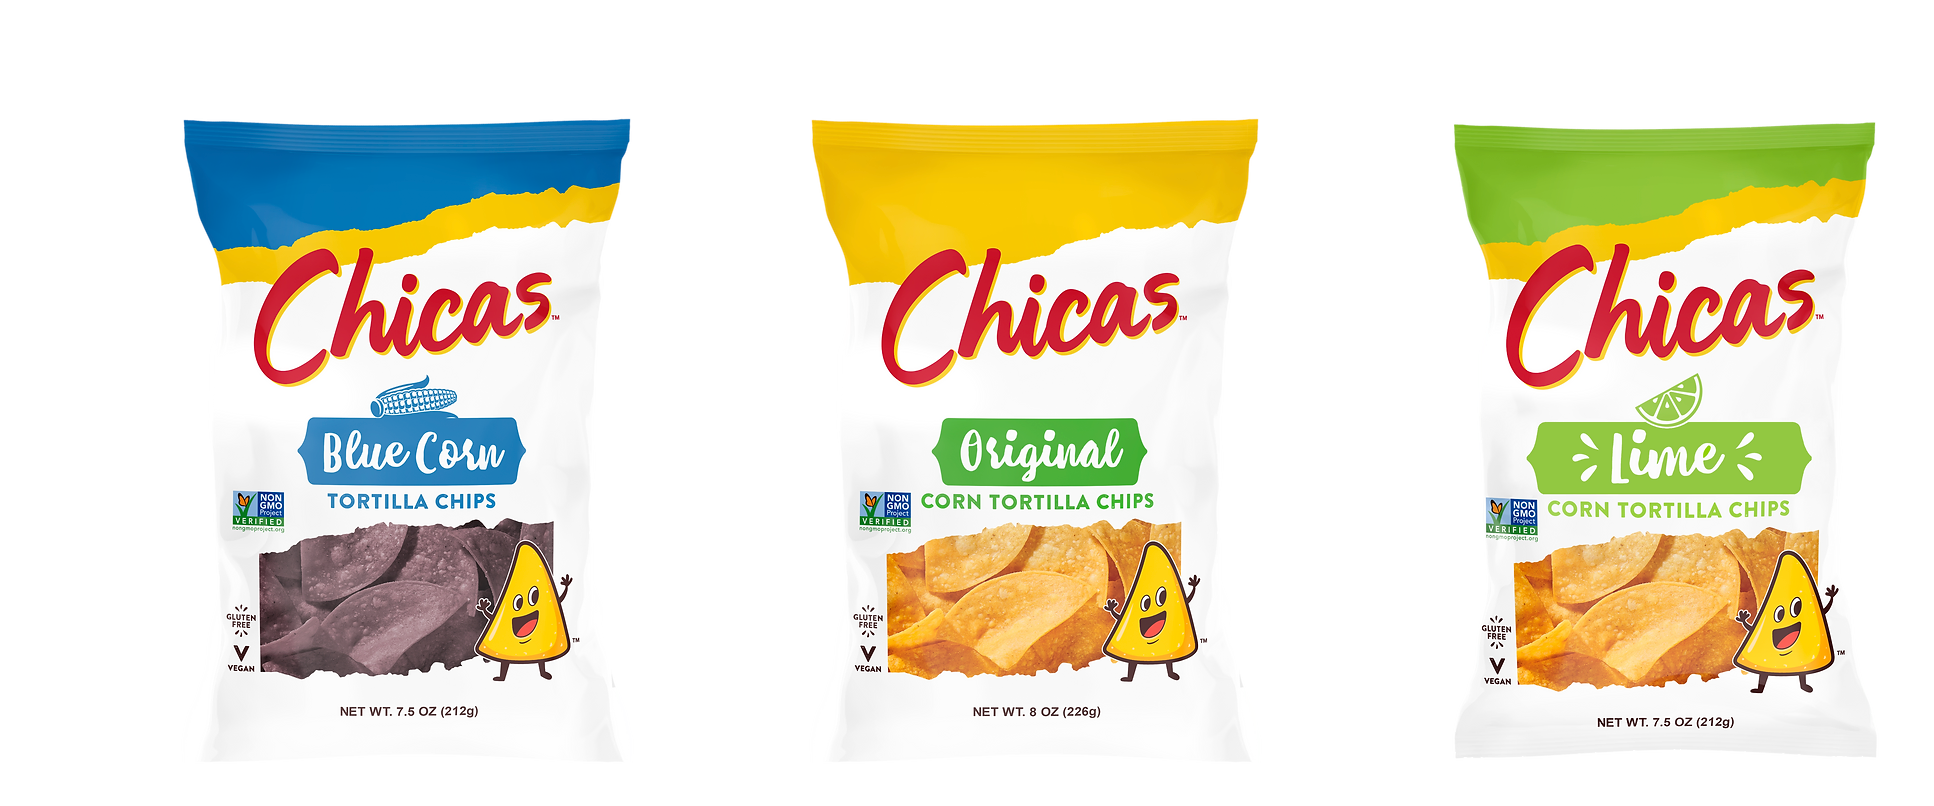 Chicas Chips